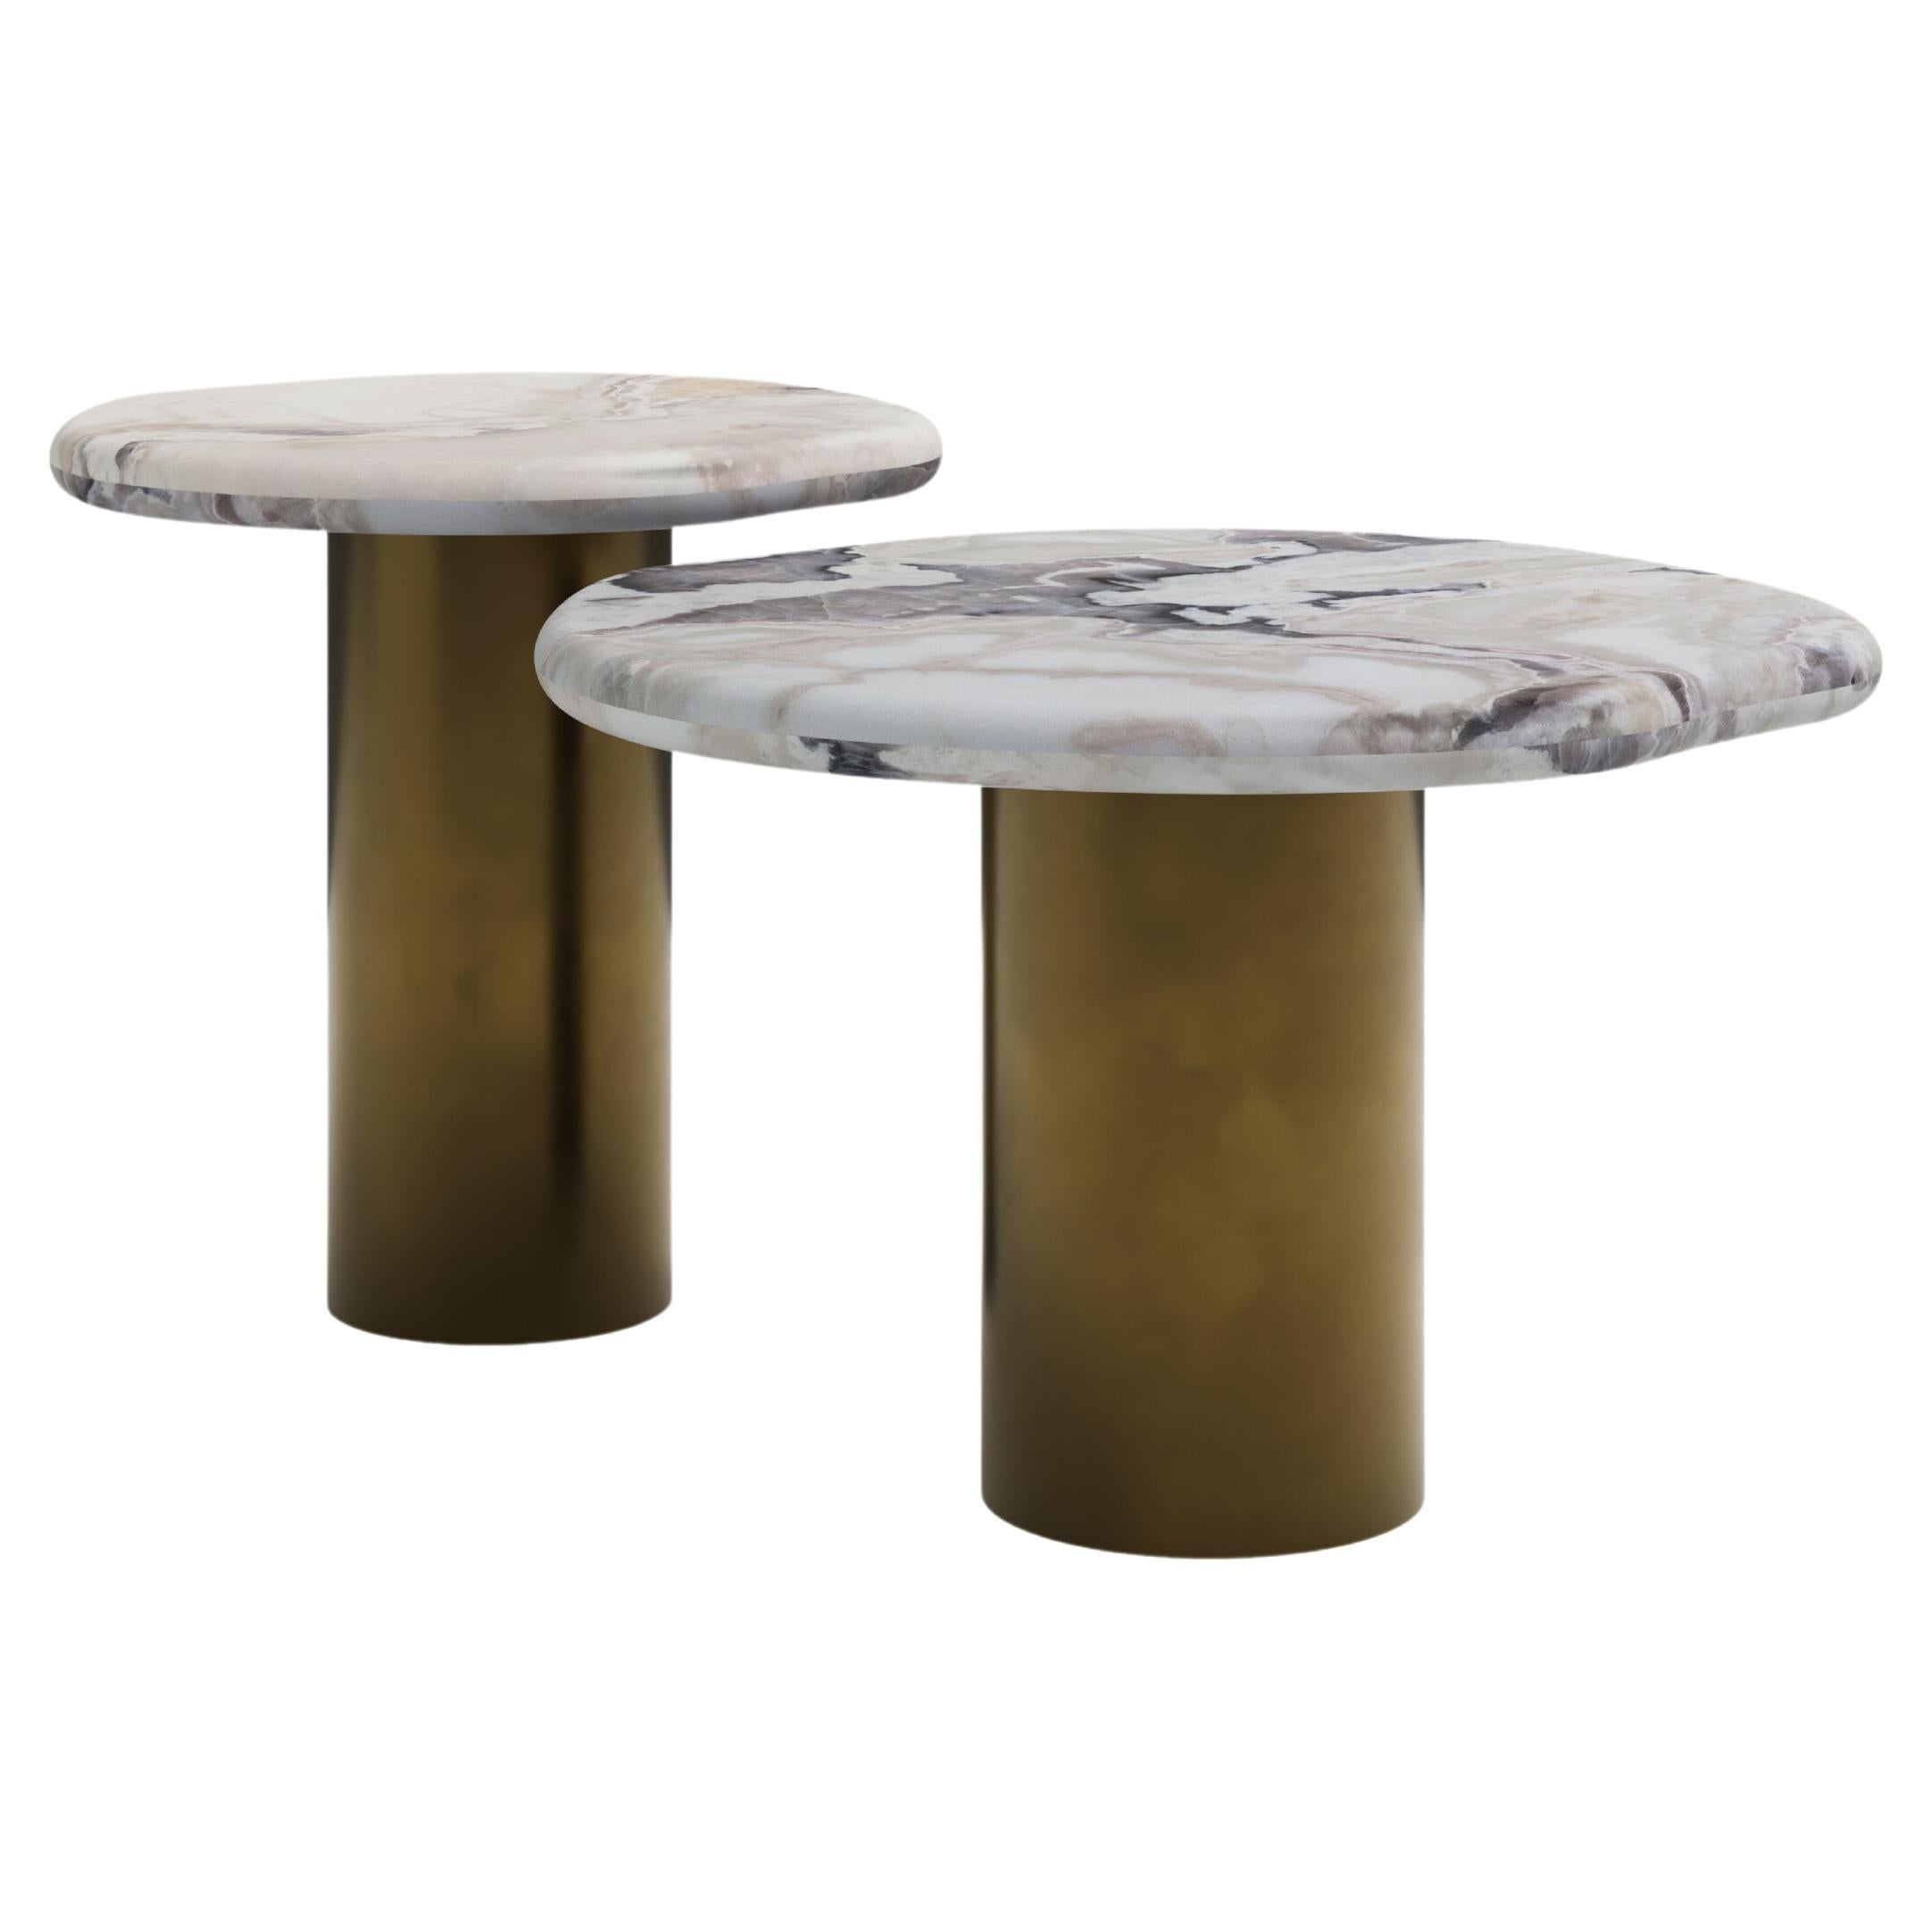 FORM(LA) Lago Round Side Table 24”L x 24”W x 16”H Oyster Marble & Antique Bronze For Sale